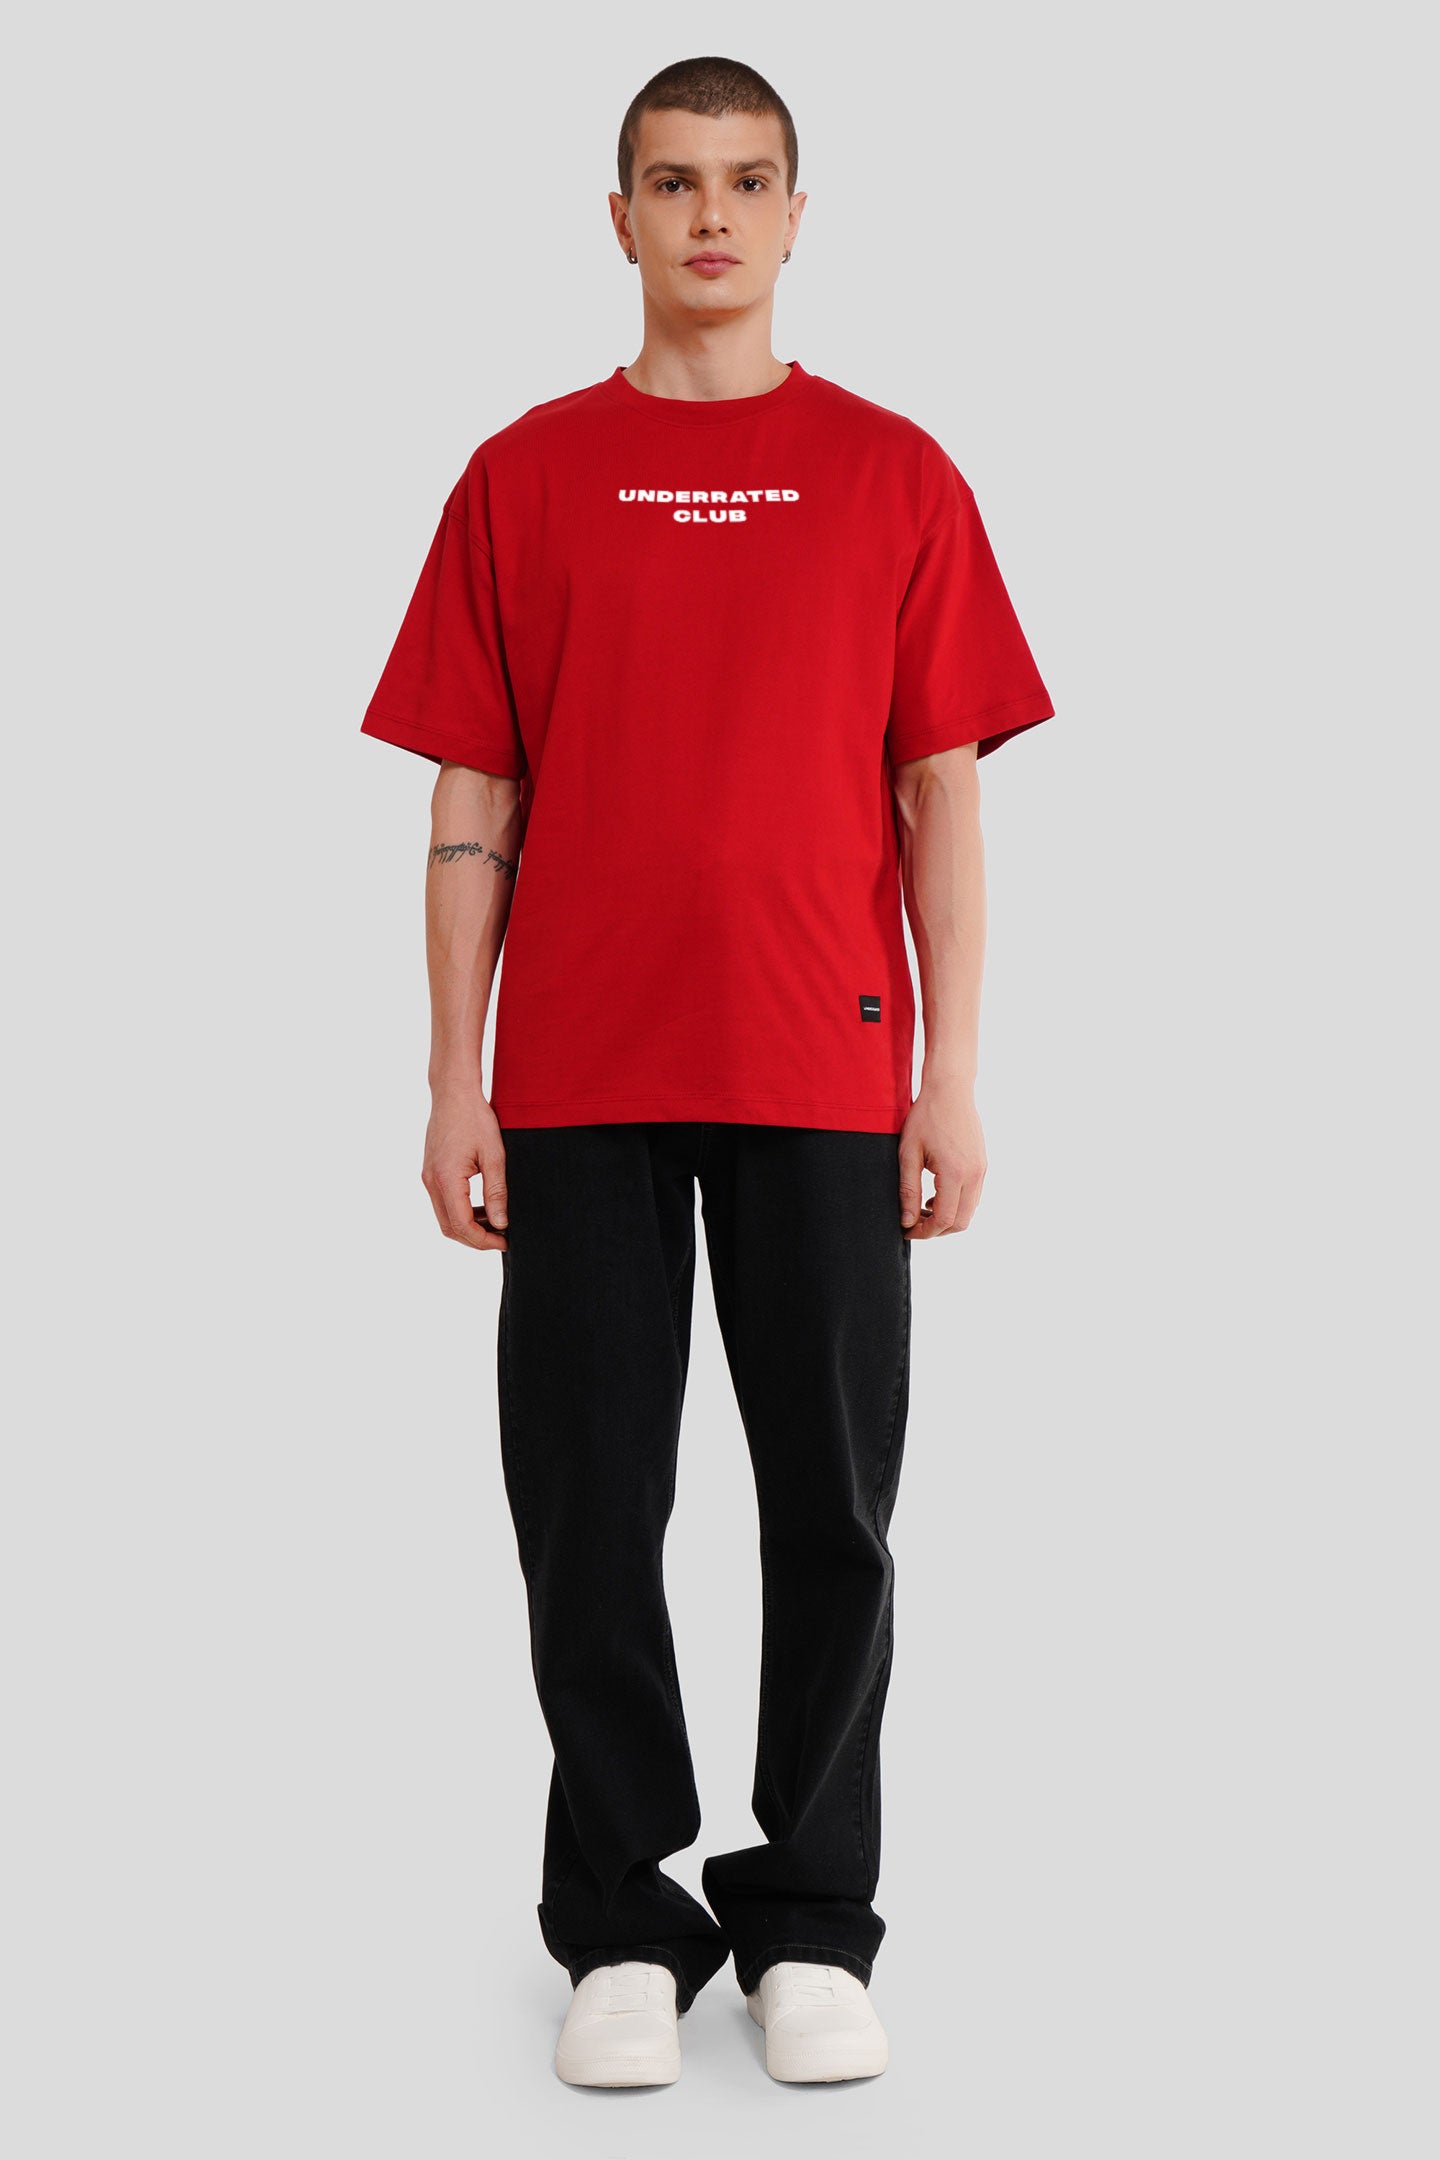 Turning Dreams Into Reality Red Printed T Shirt Men Oversized Fit With Front And Back Design Pic 4